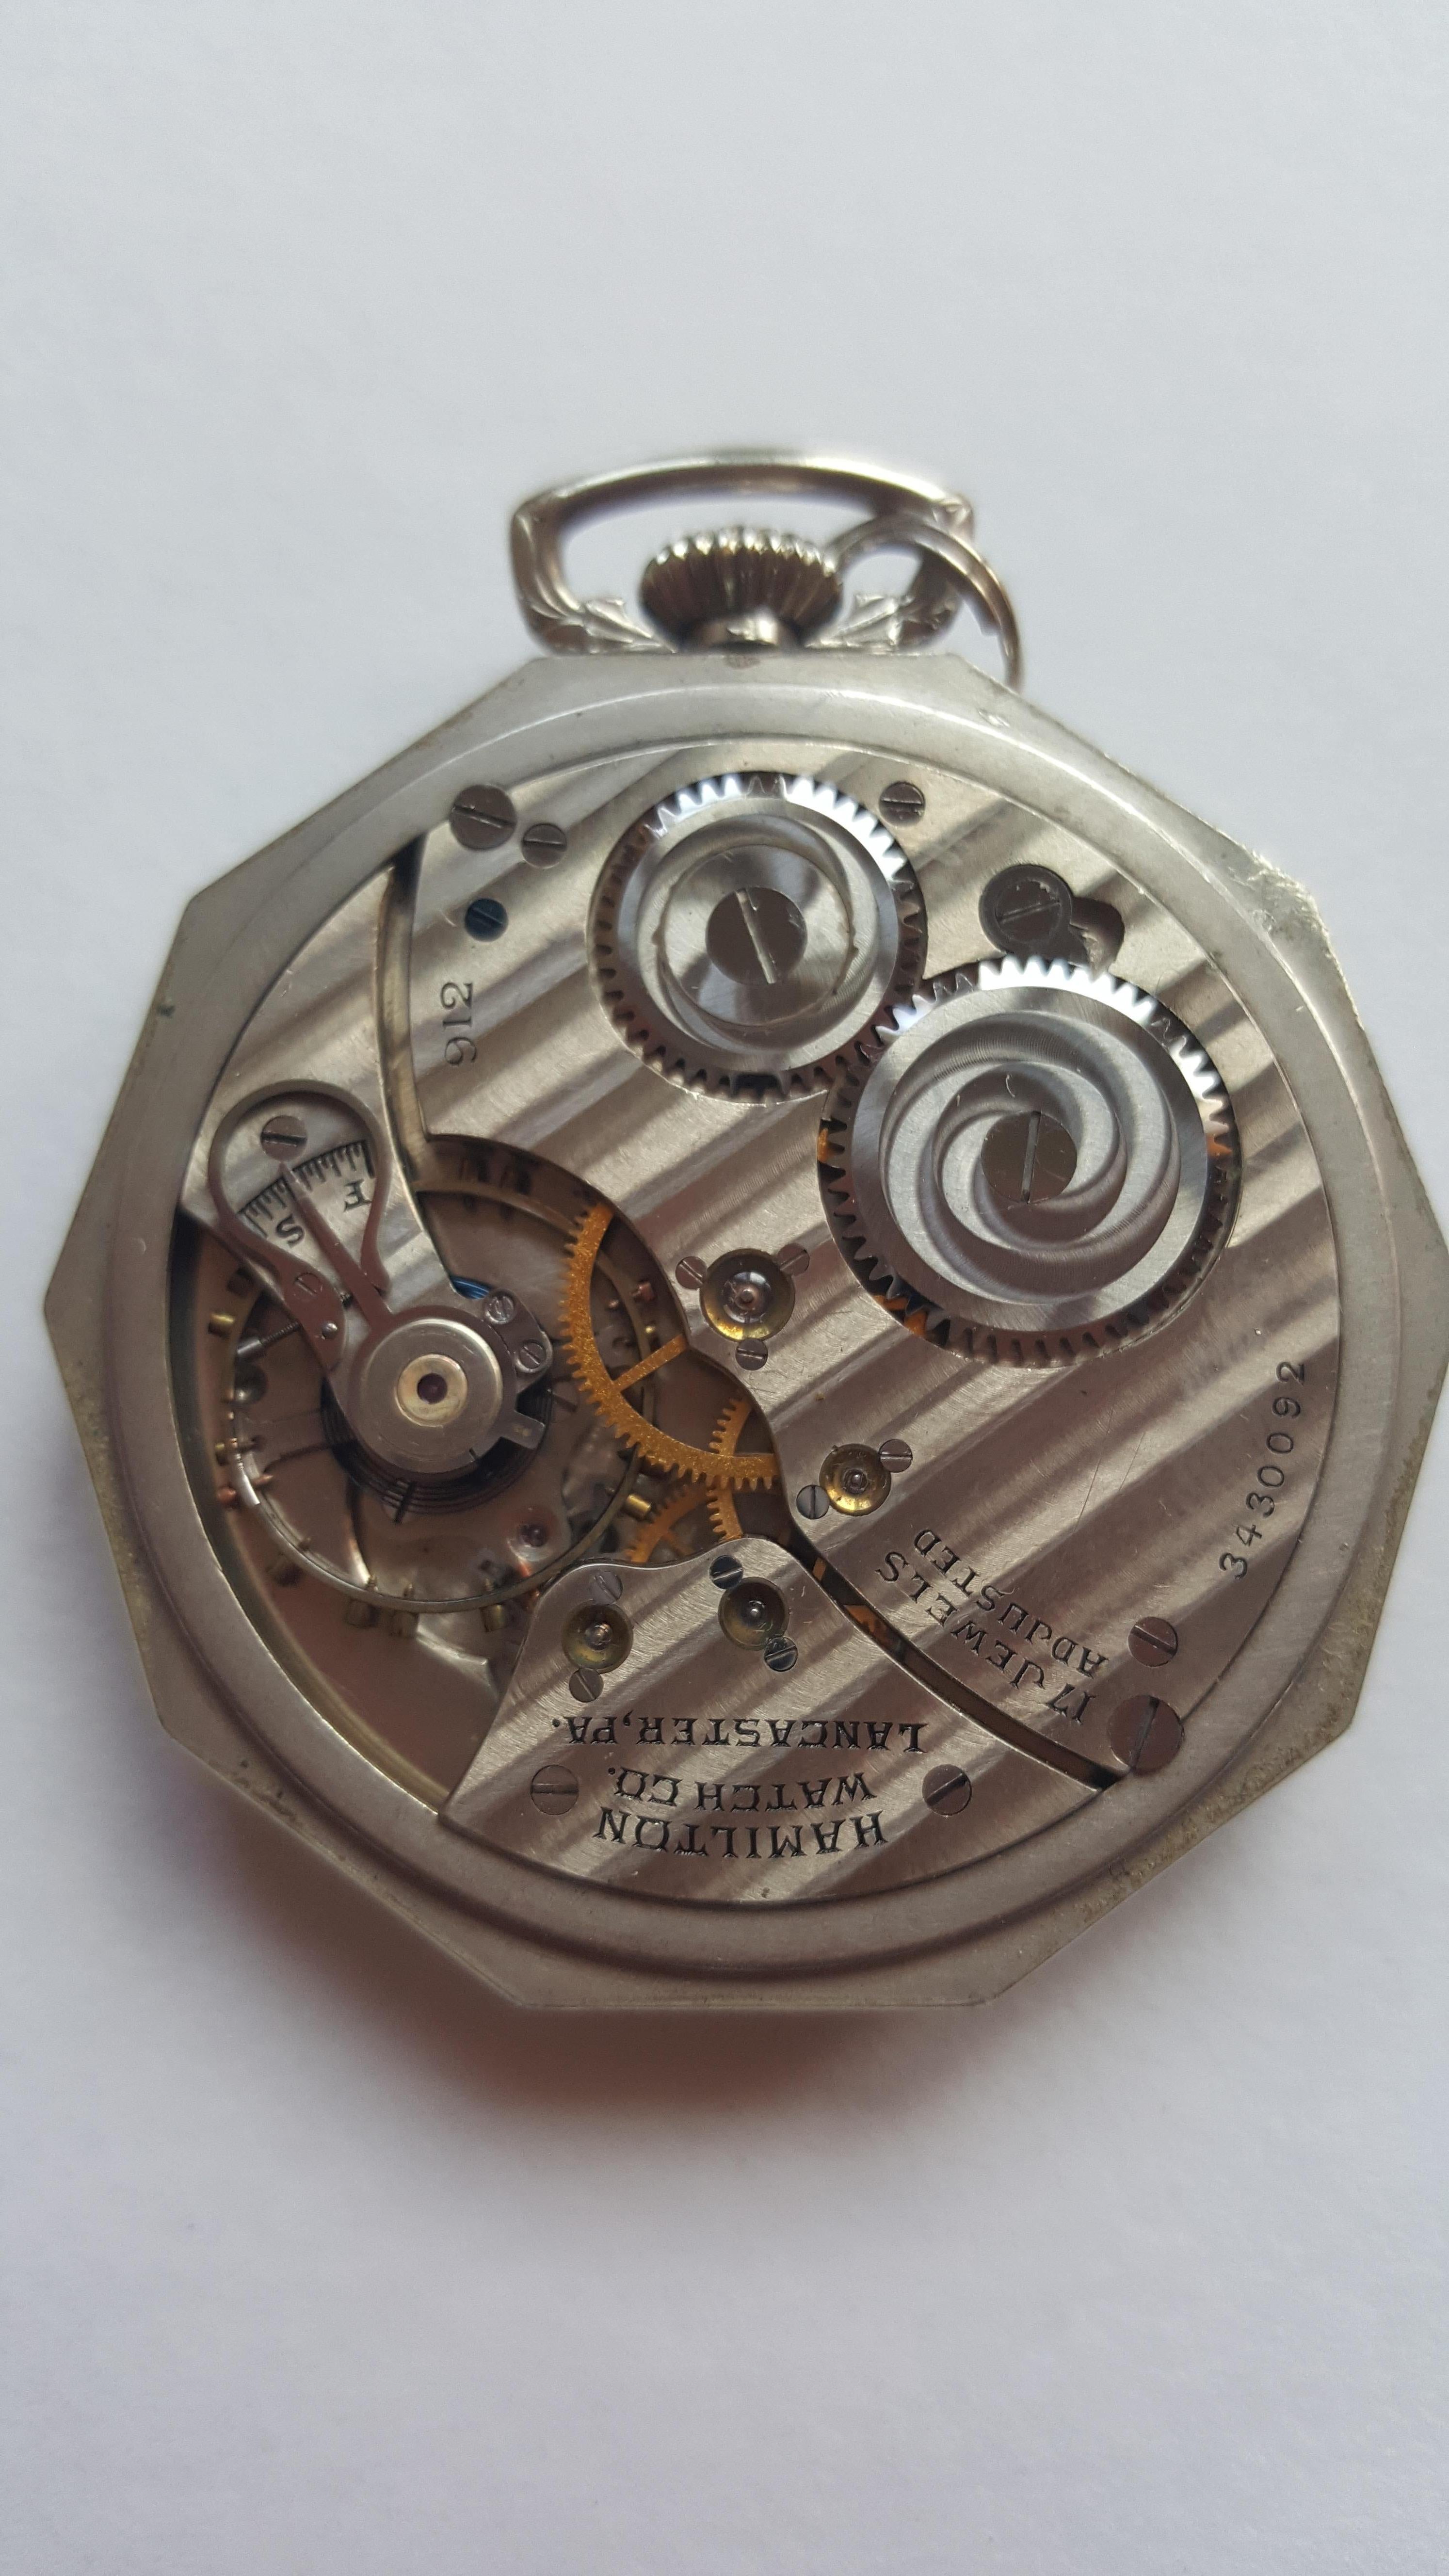 Vintage 1930's Hamilton 14k Gold Filled Pocket Watch, Grade 912, Rotating Seconds, 17 Jewel, Adjusted, Hamilton Watch Co., Good Condition
Manufacturer Hamilton. Beautiful watch and more rare to find the model with rotating seconds, engraved design,